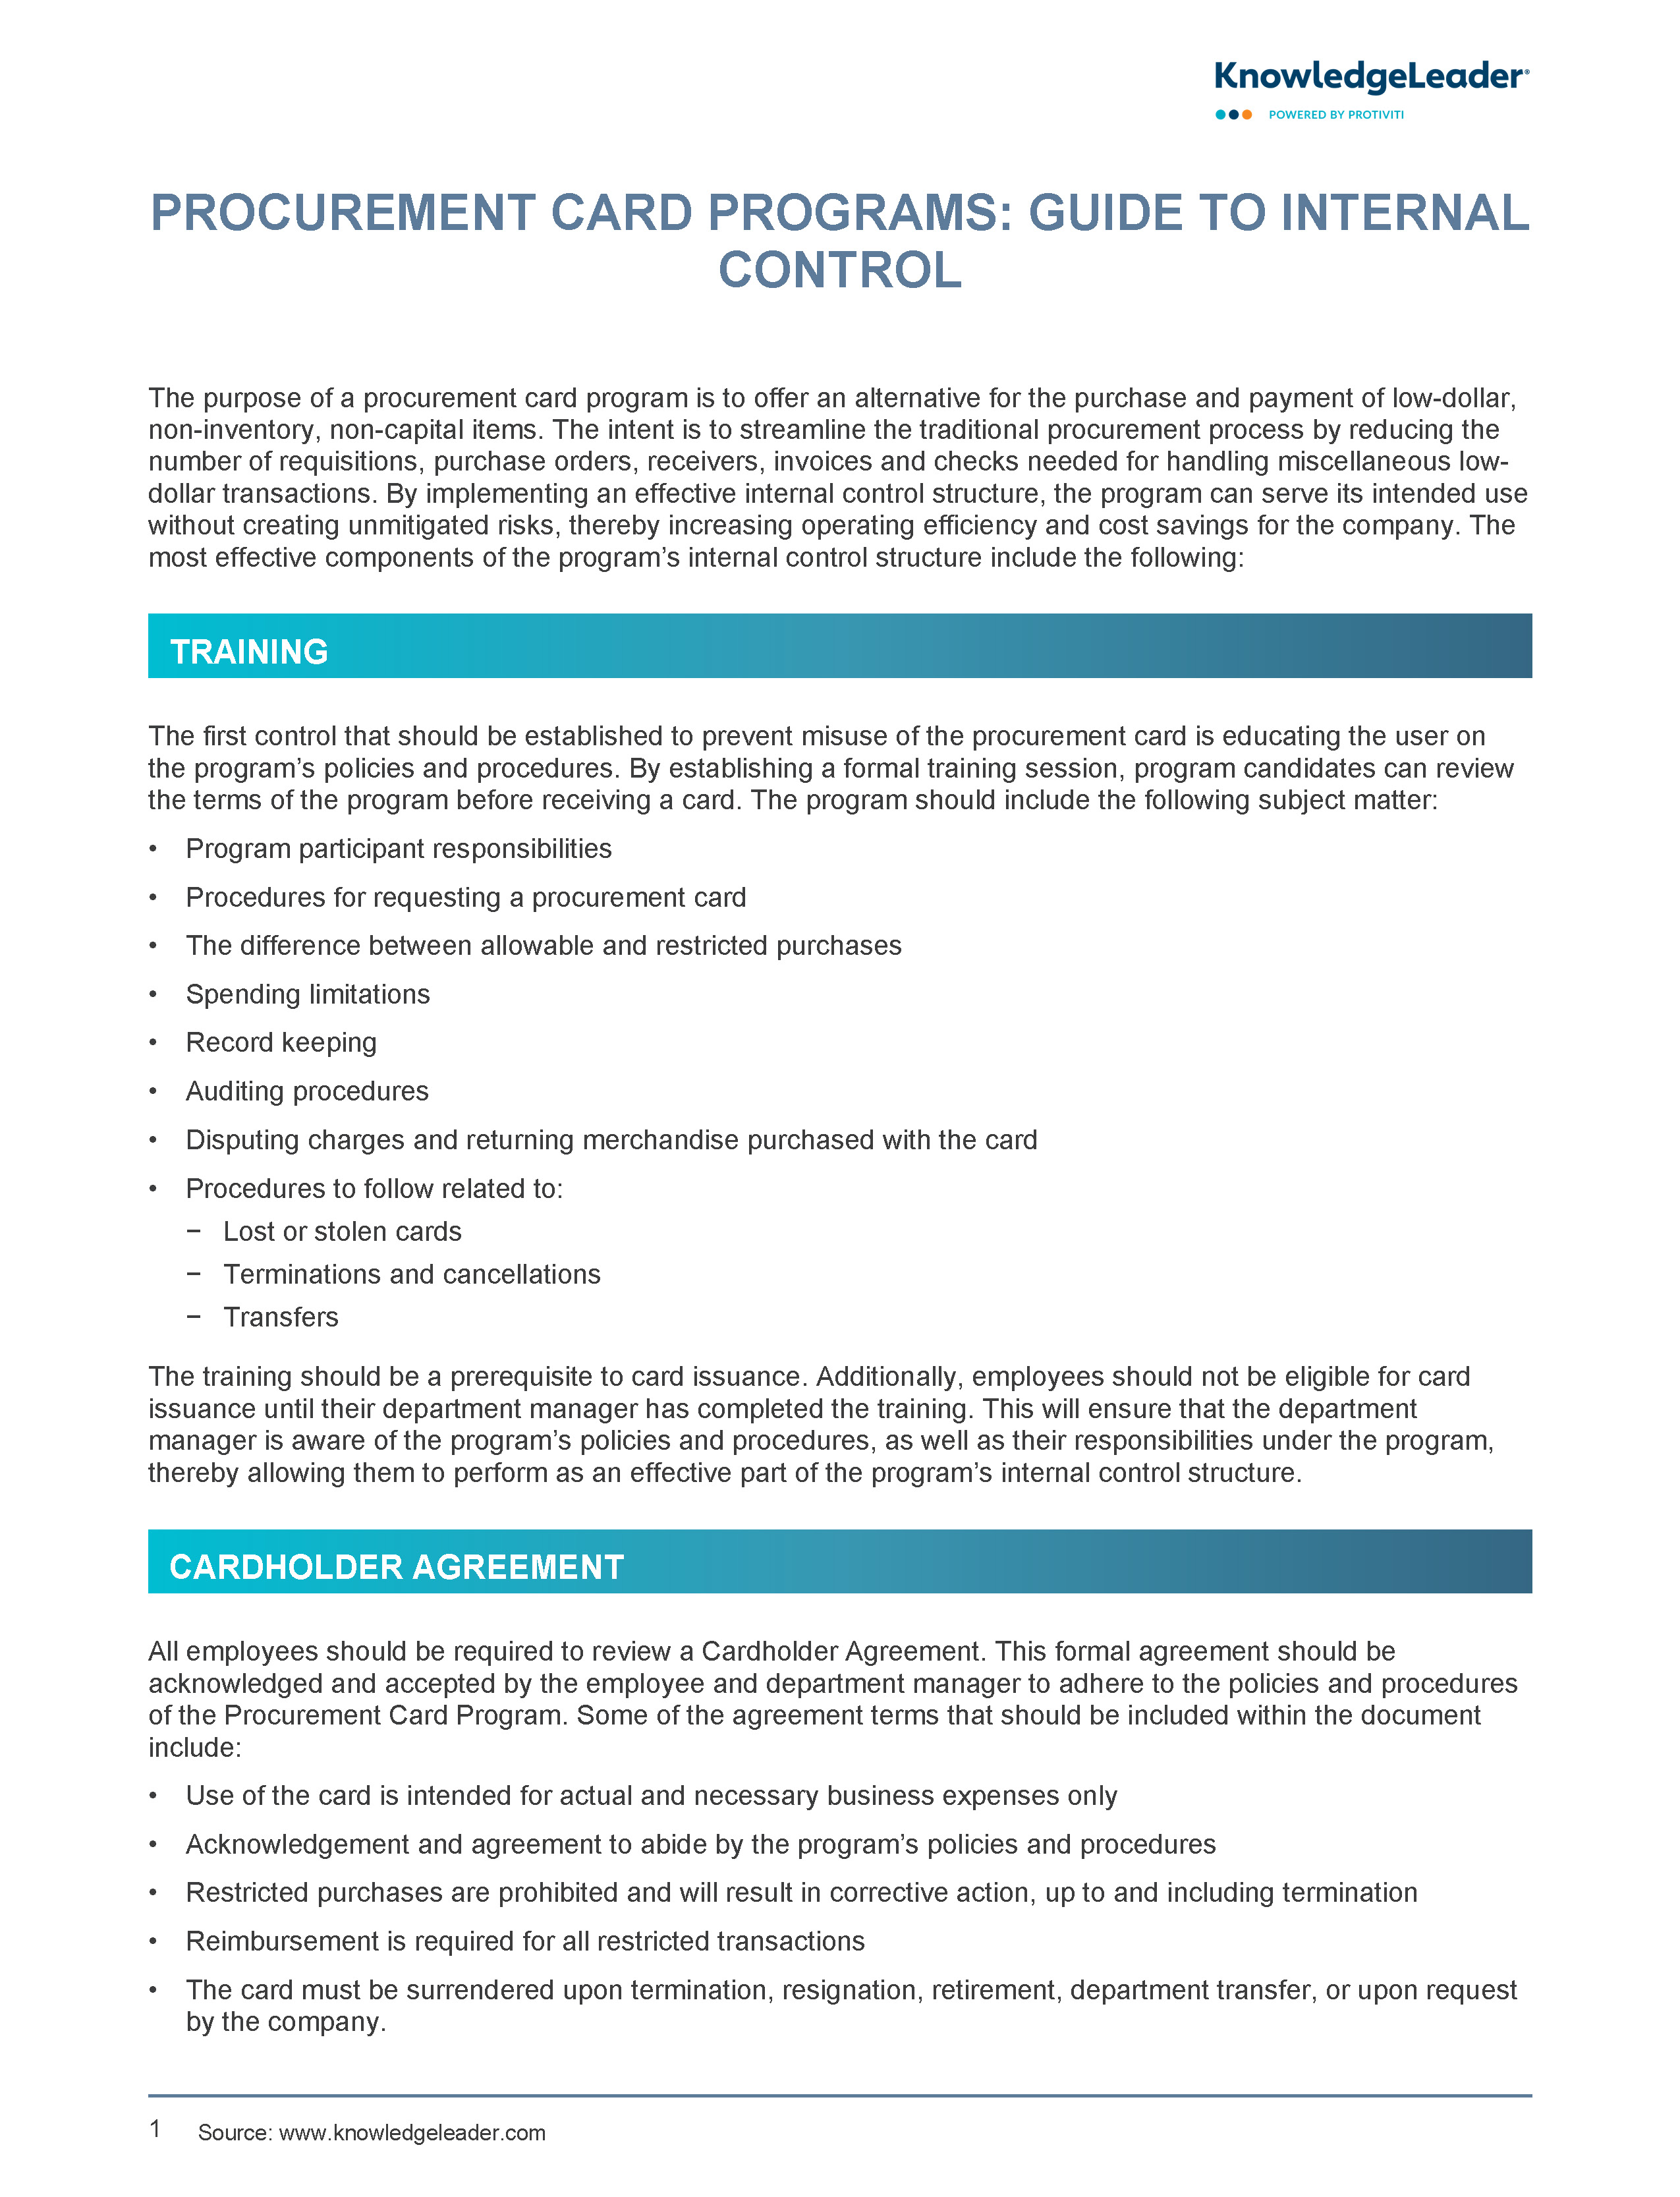 Screenshot of the first page of Procurement Card Programs Guide to Internal Control